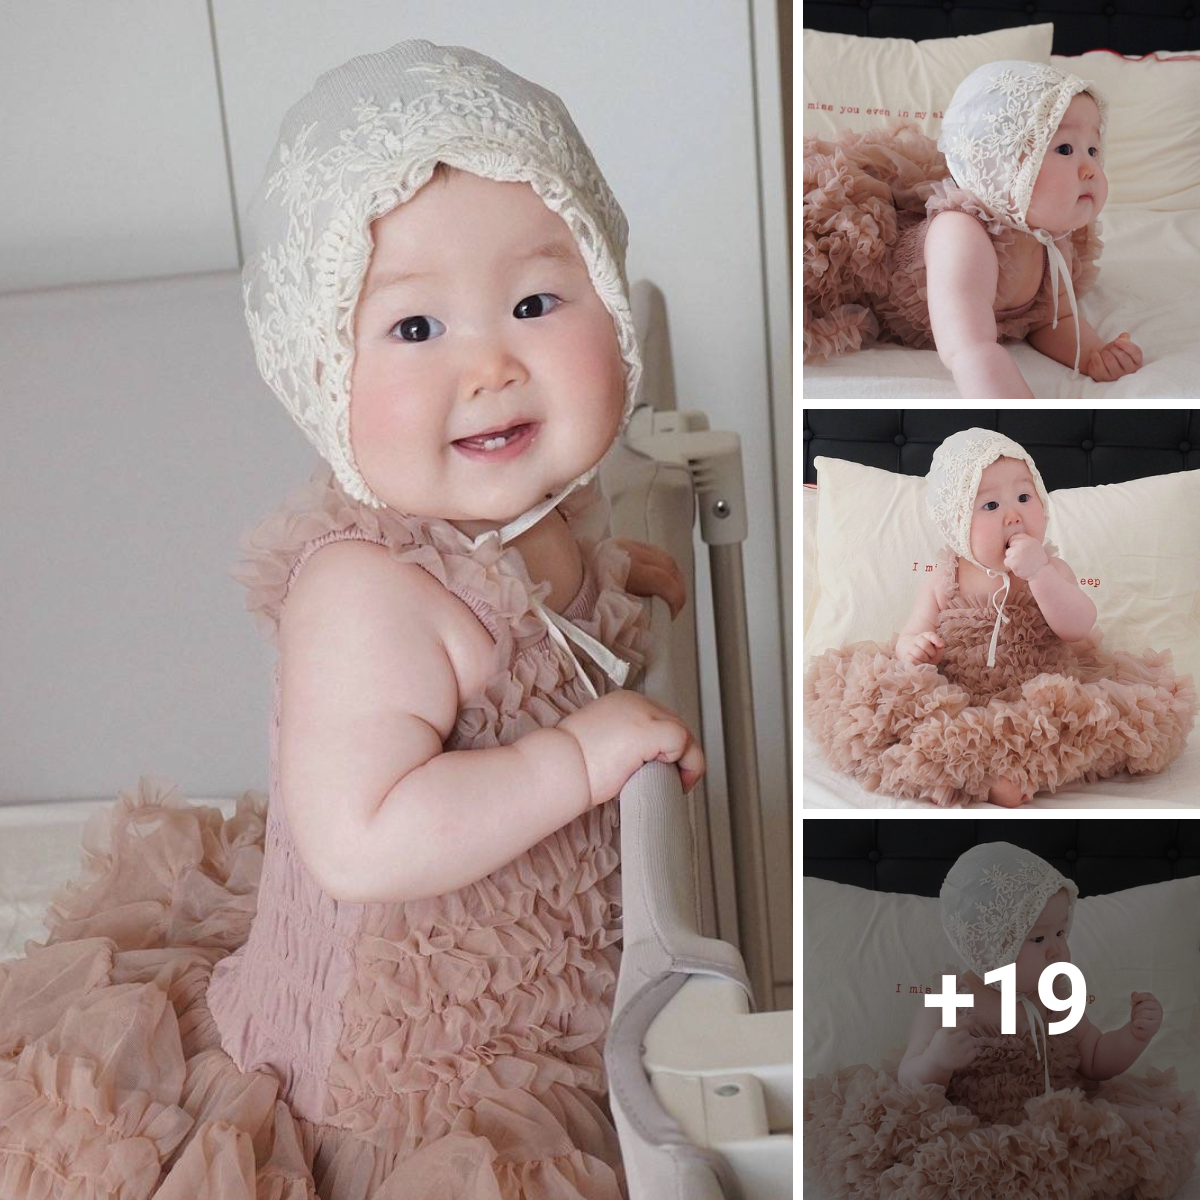 Adorable Cuteness: The Stunning Infant